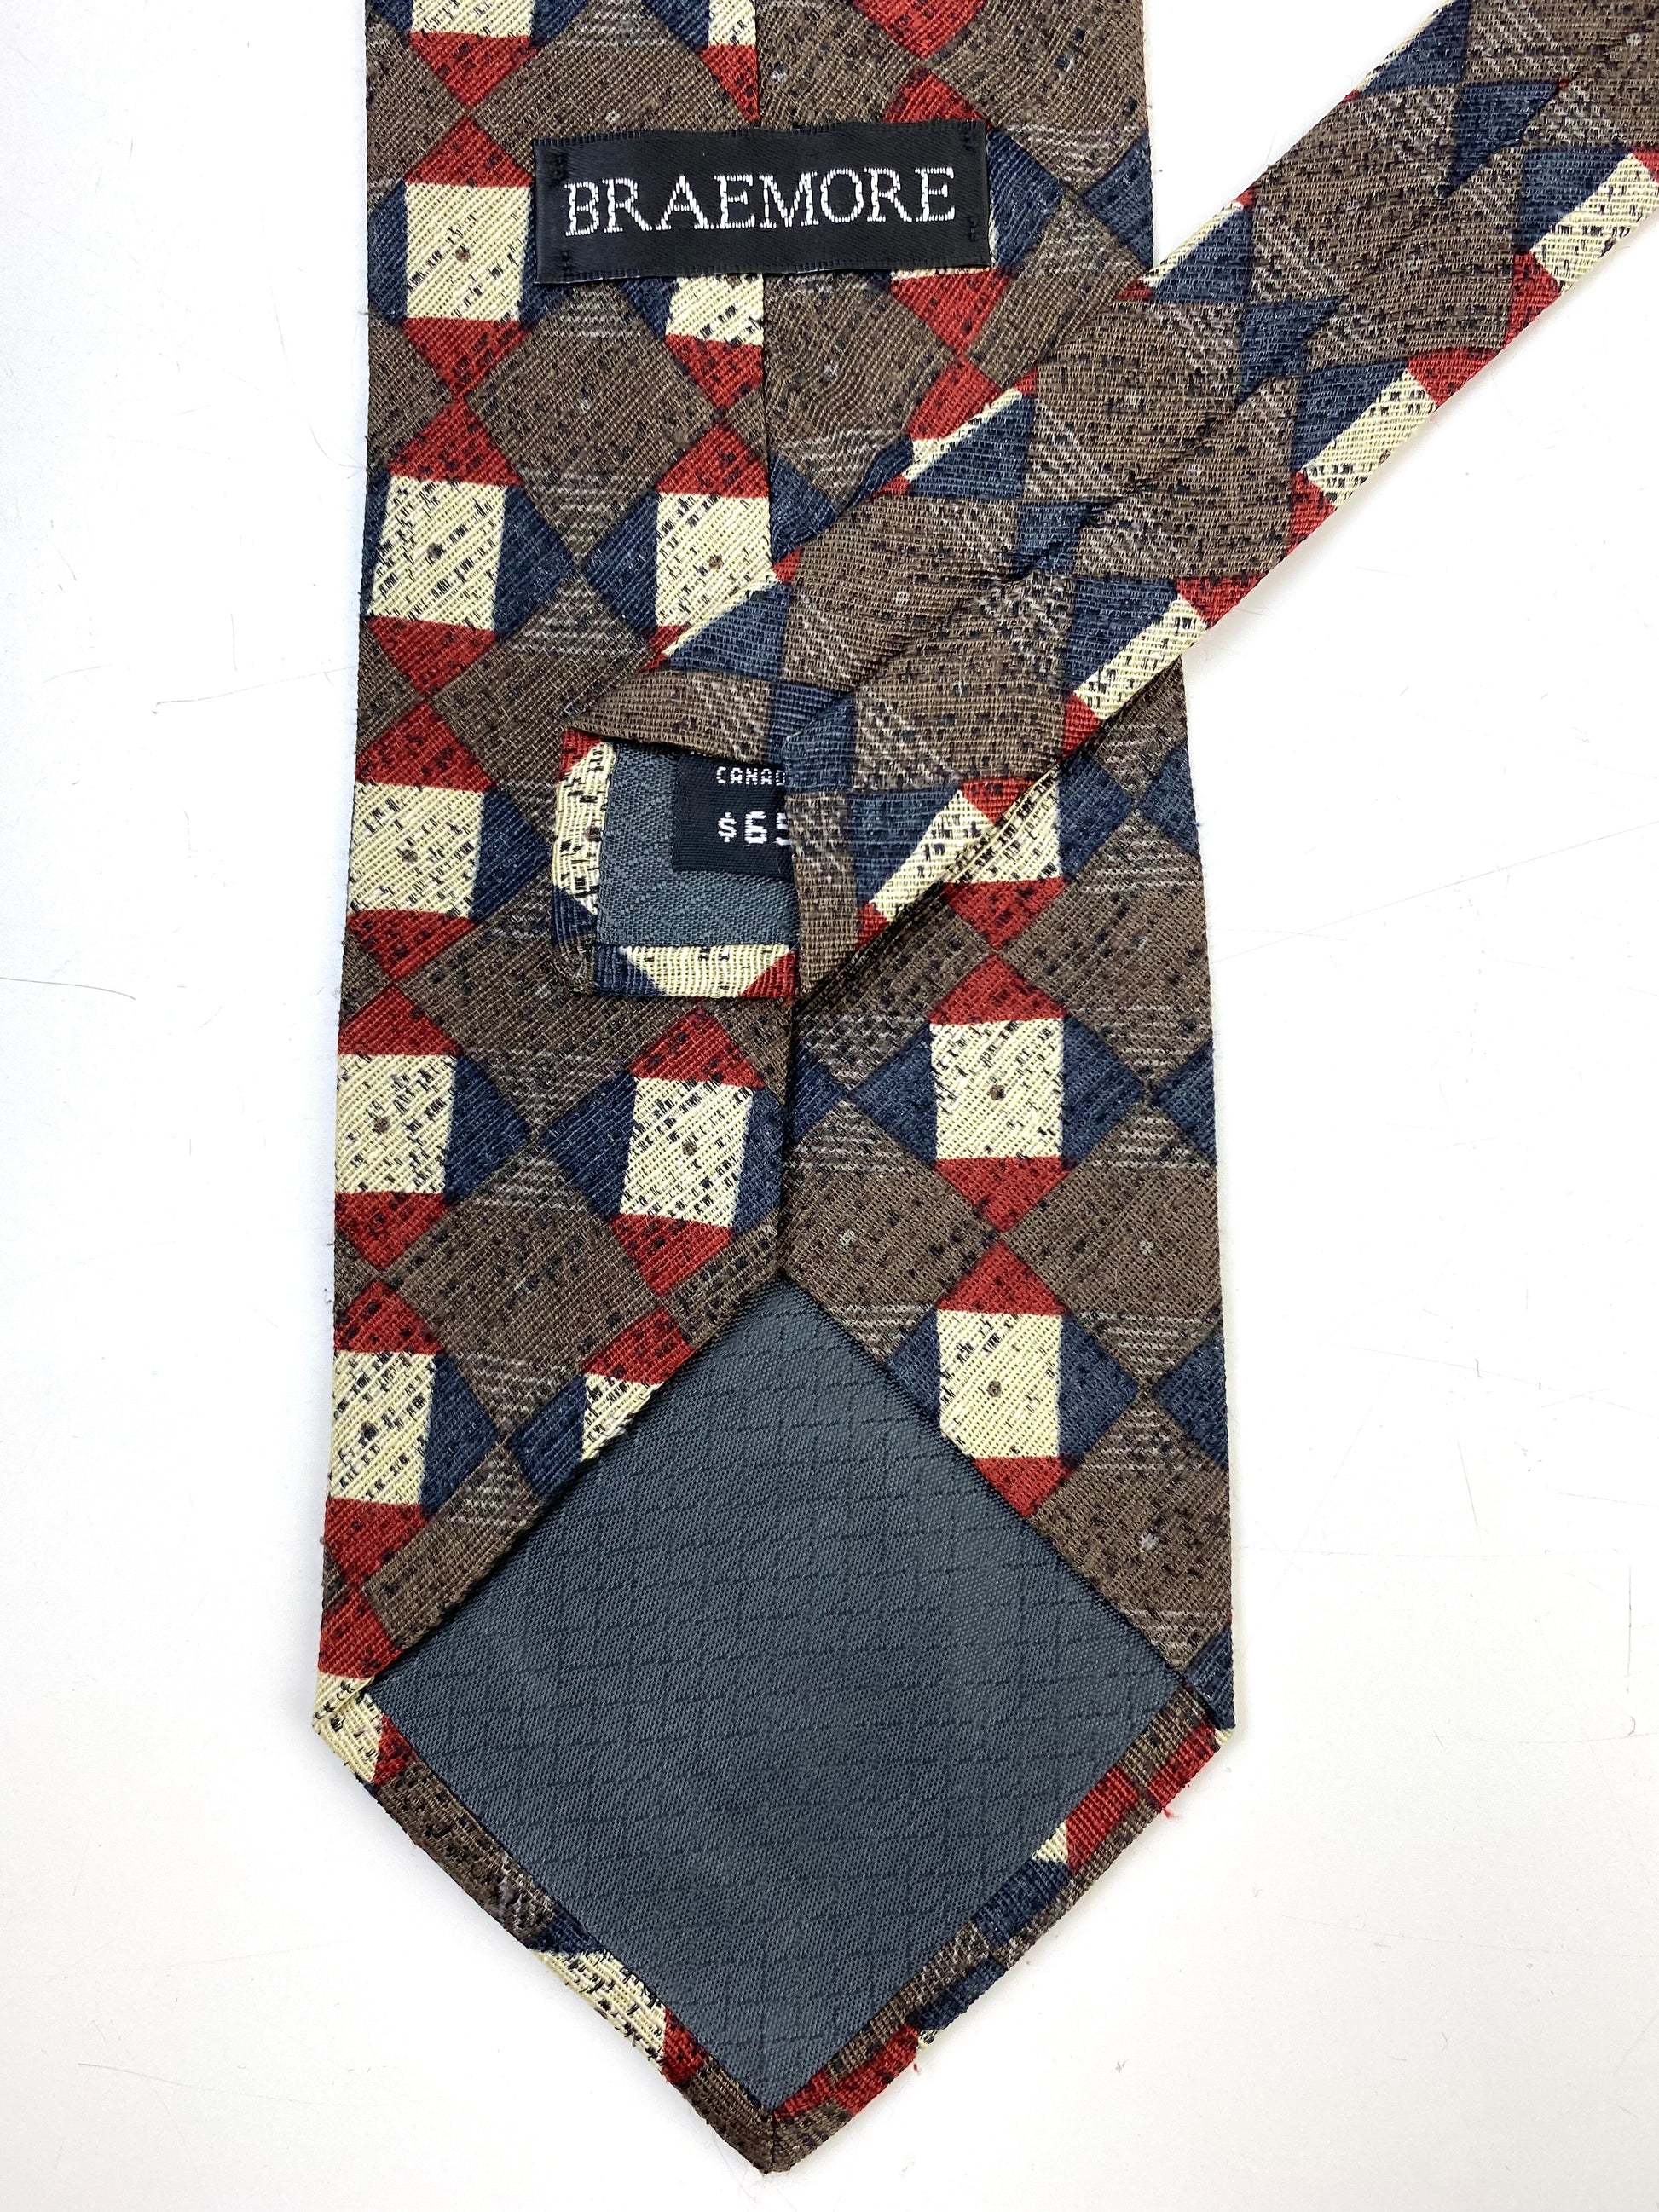 Back and labels of: 90s Deadstock Silk Necktie, Men's Vintage Taupe/ Red/ Blue Check Pattern Tie, NOS